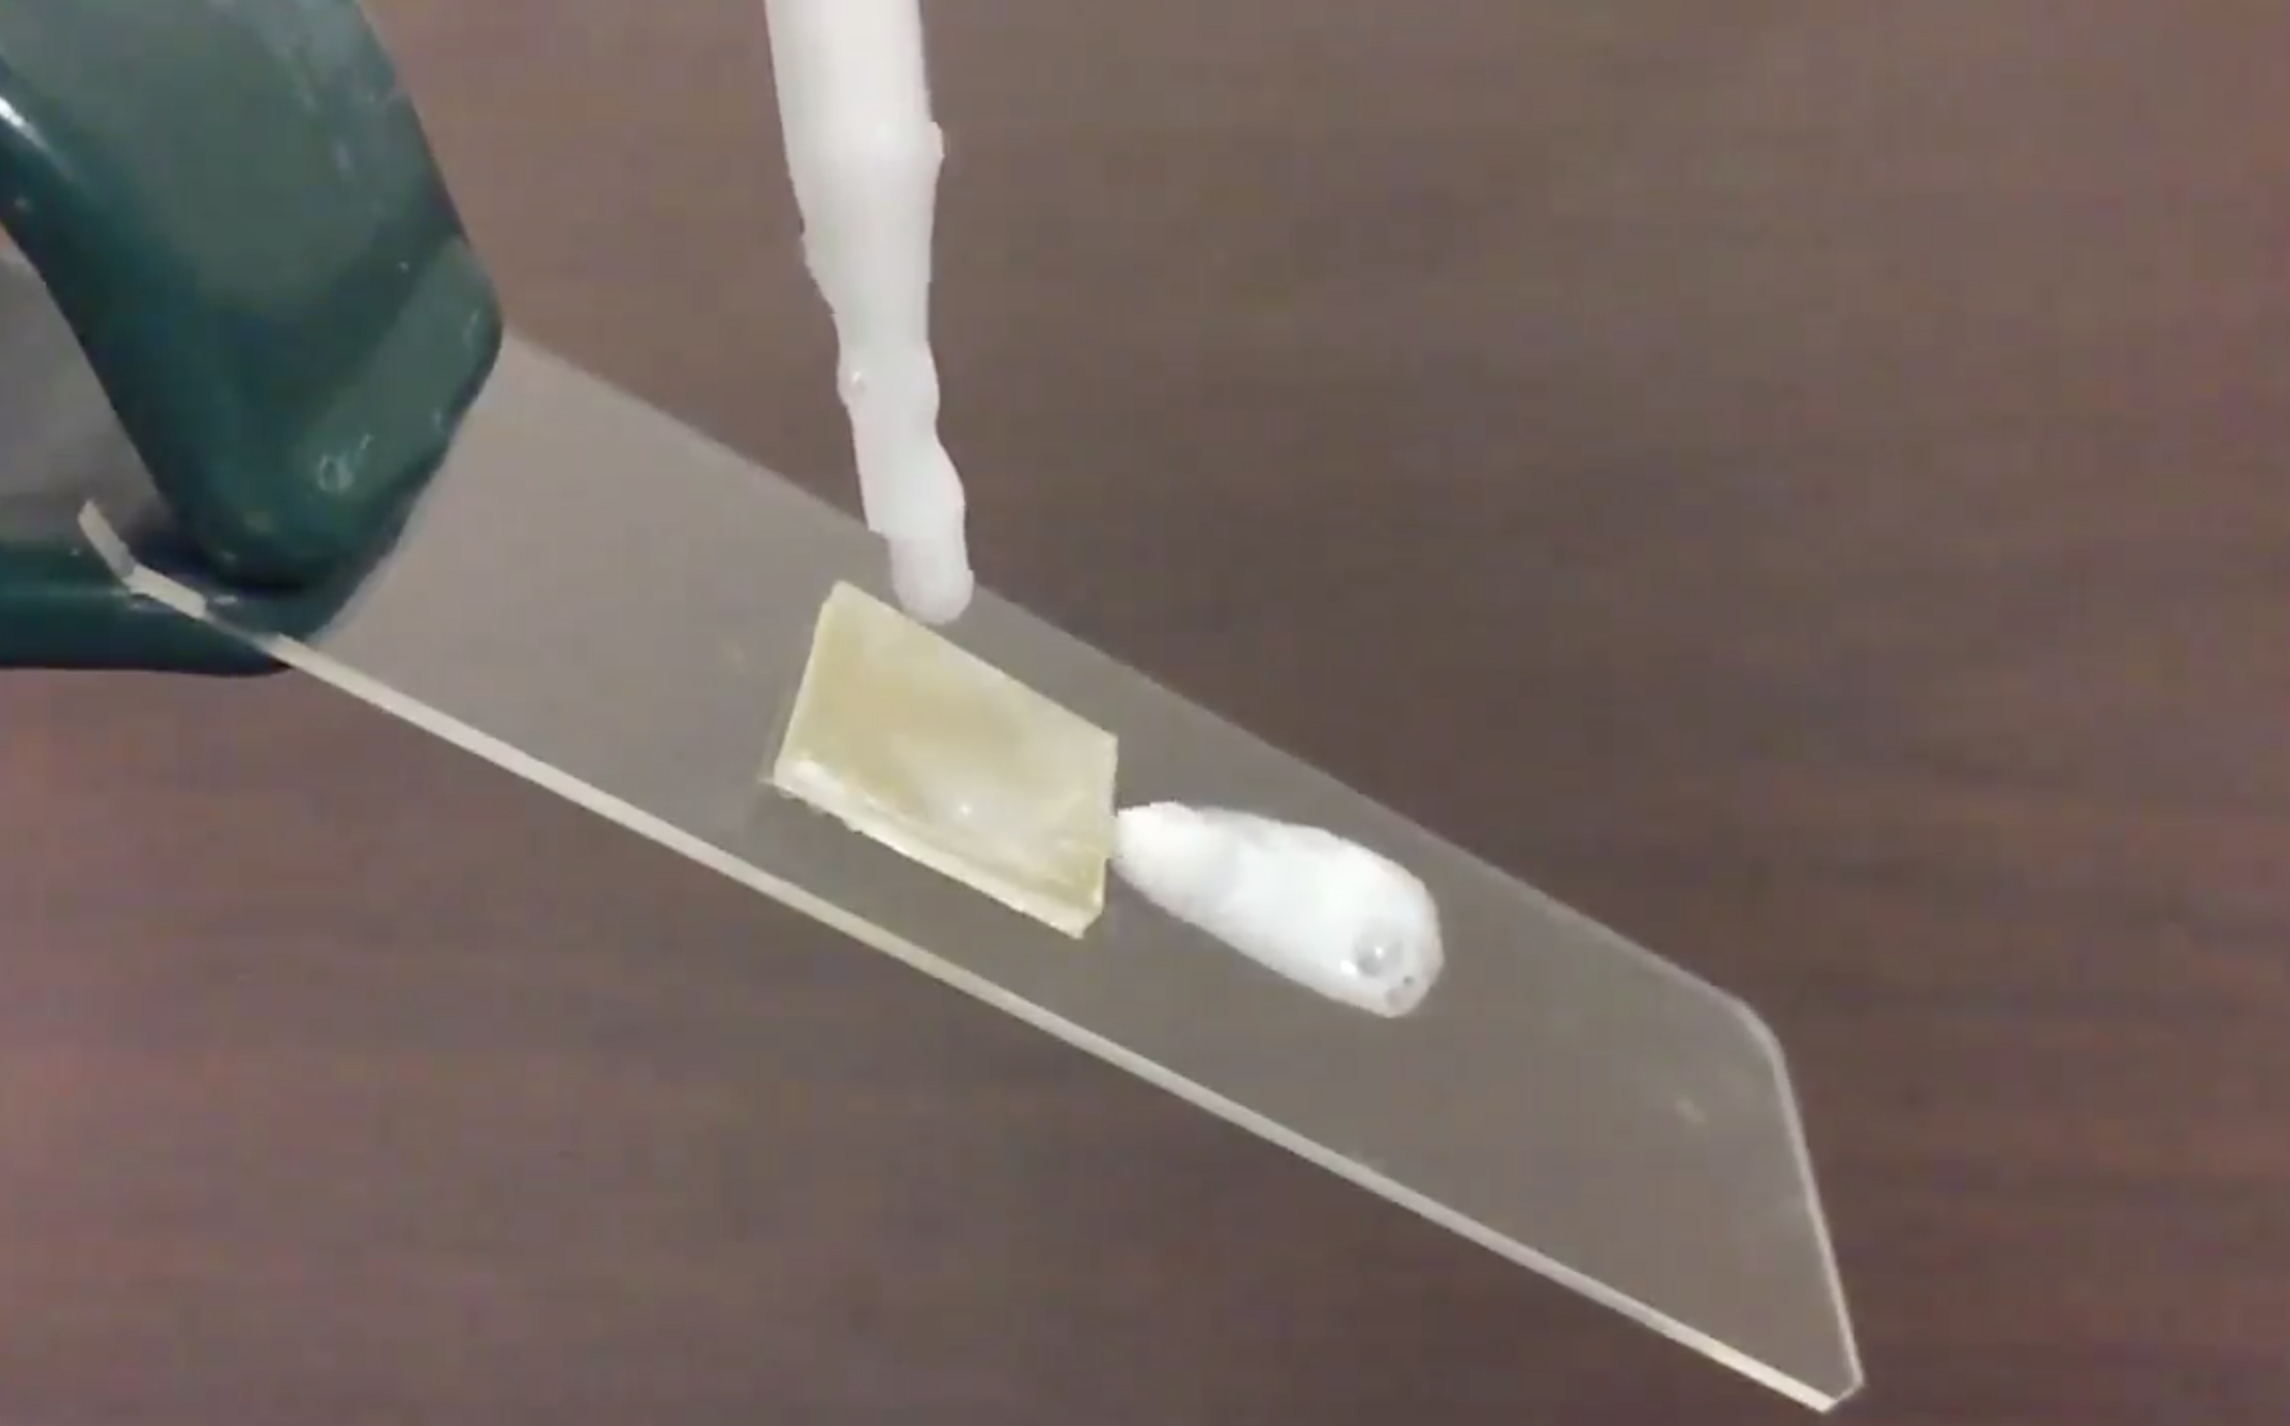 New Plastic Coating Will Let You Get Every Last Drop Of Shampoo Out Of The Bottle